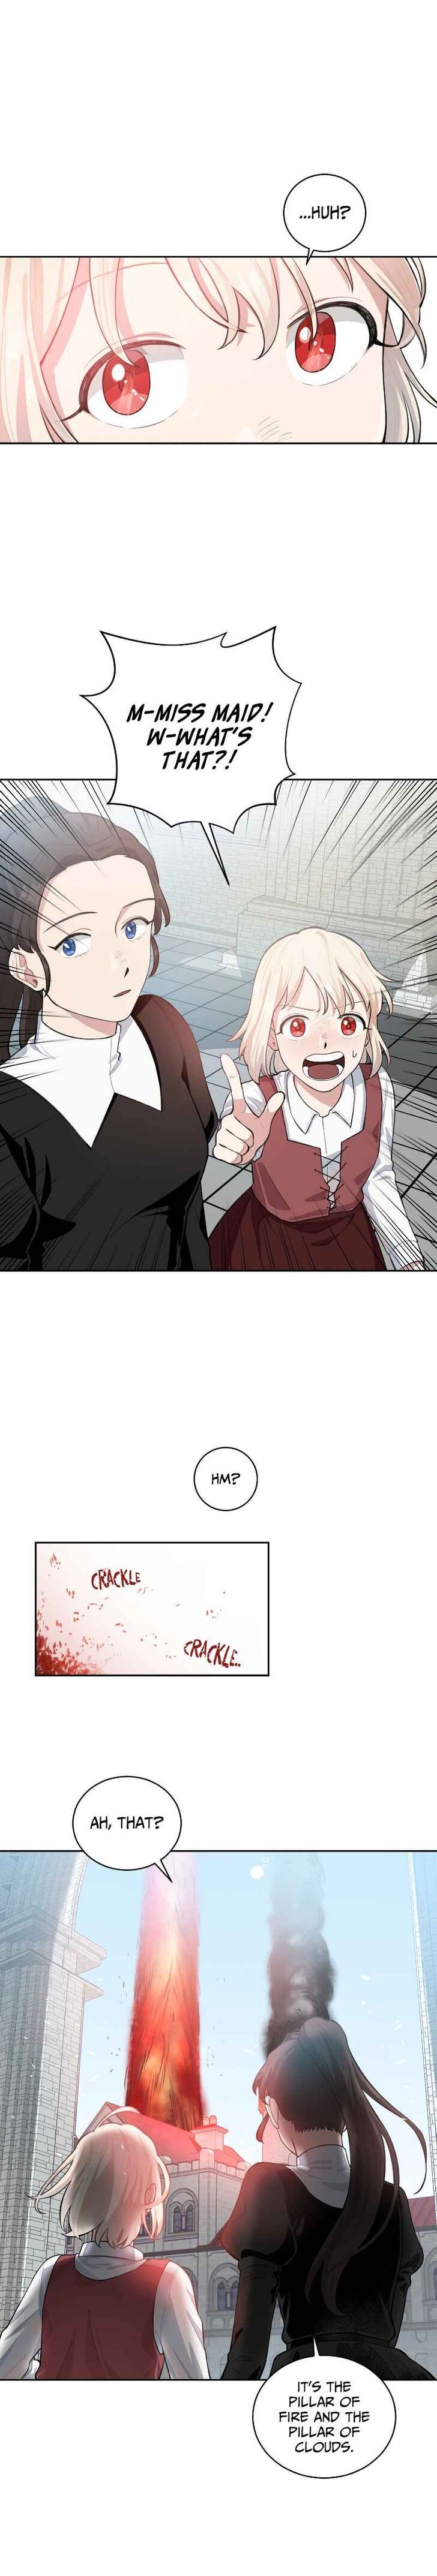 I Became a Maid in a TL Novel Chapter 002 page 11